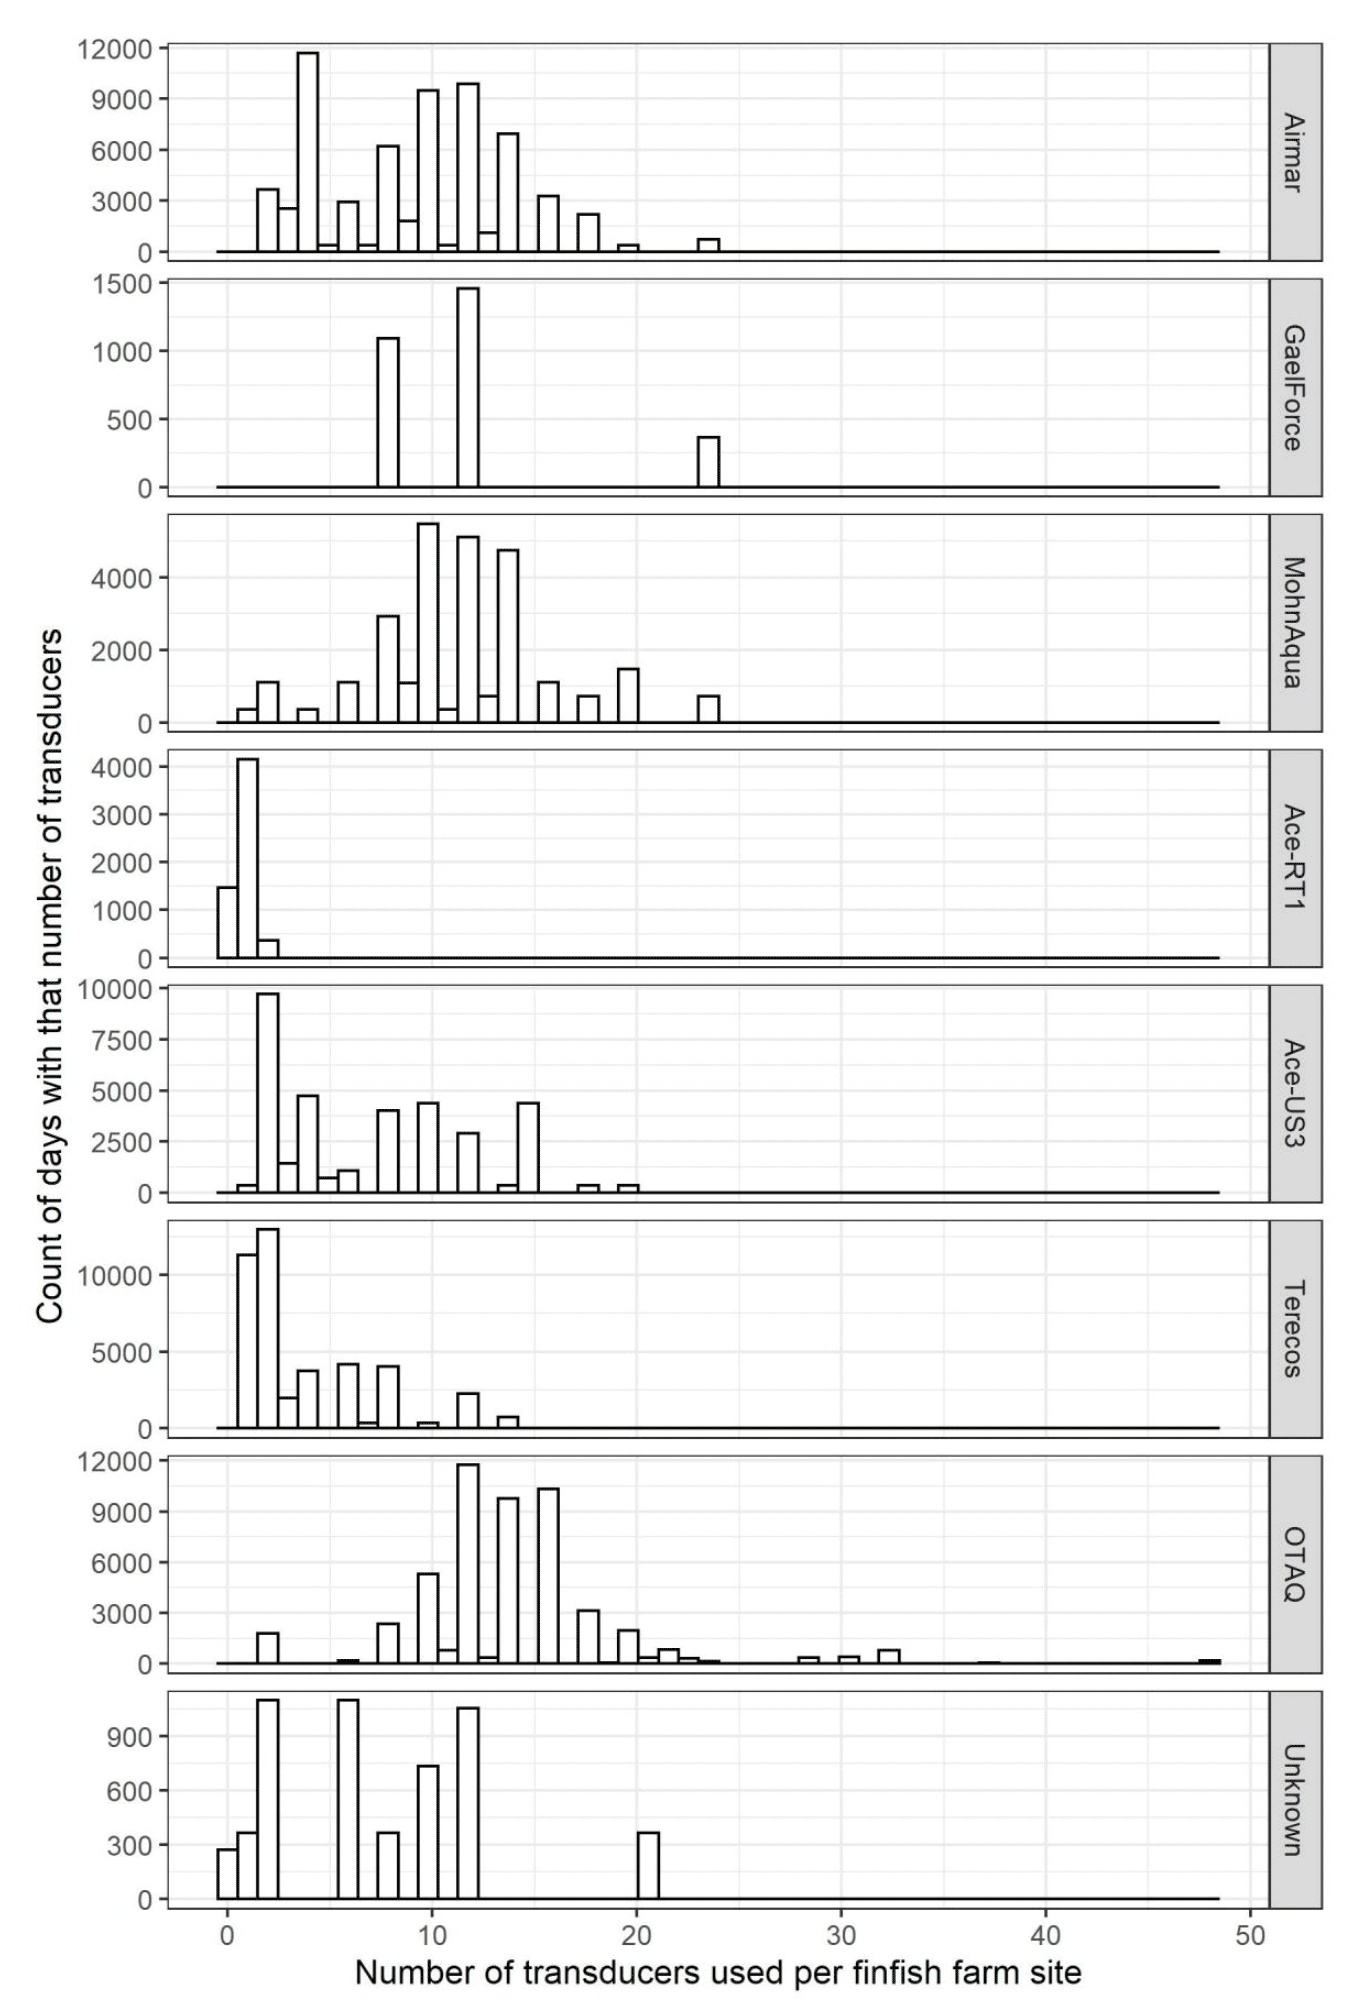 Differing distributions of the daily number of transducers installed on finfish farms by device type, 2014-2020. Y-axis shows the count of days where each number of transducers was installed.